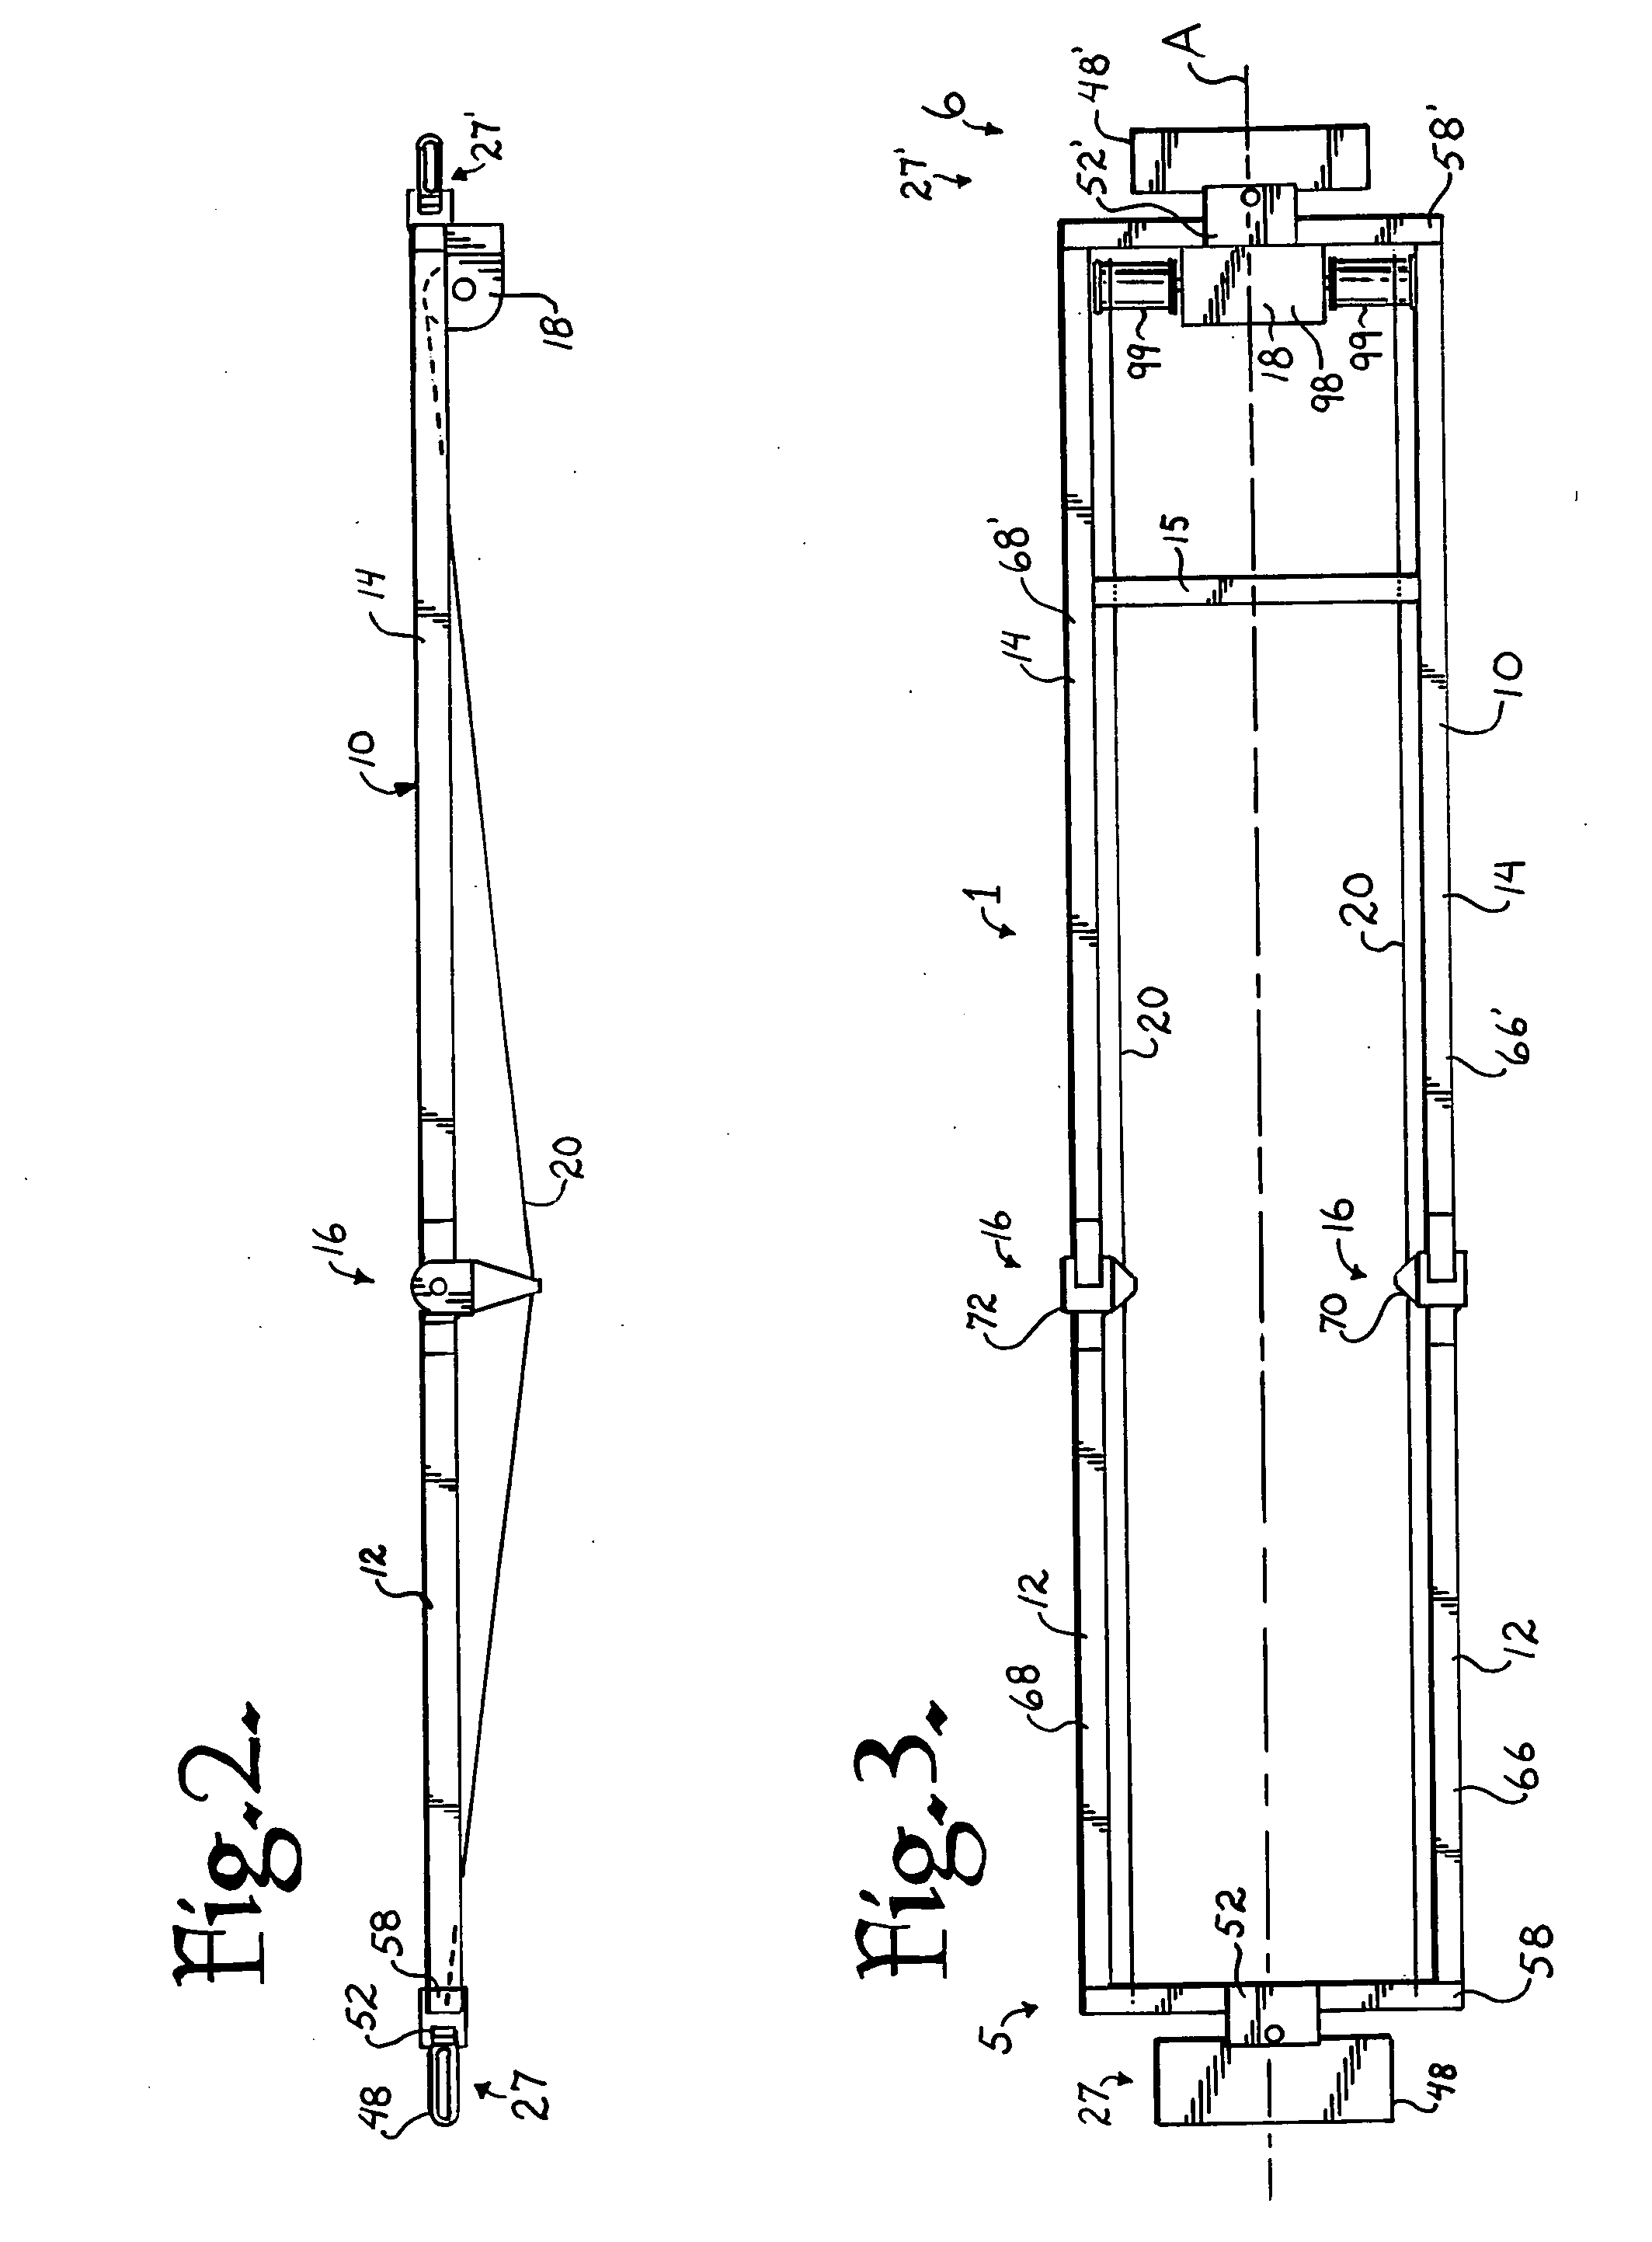 Patient positioning support structure with coordinated continuous nonsegmented articulation, rotation and lift, and locking fail-safe device